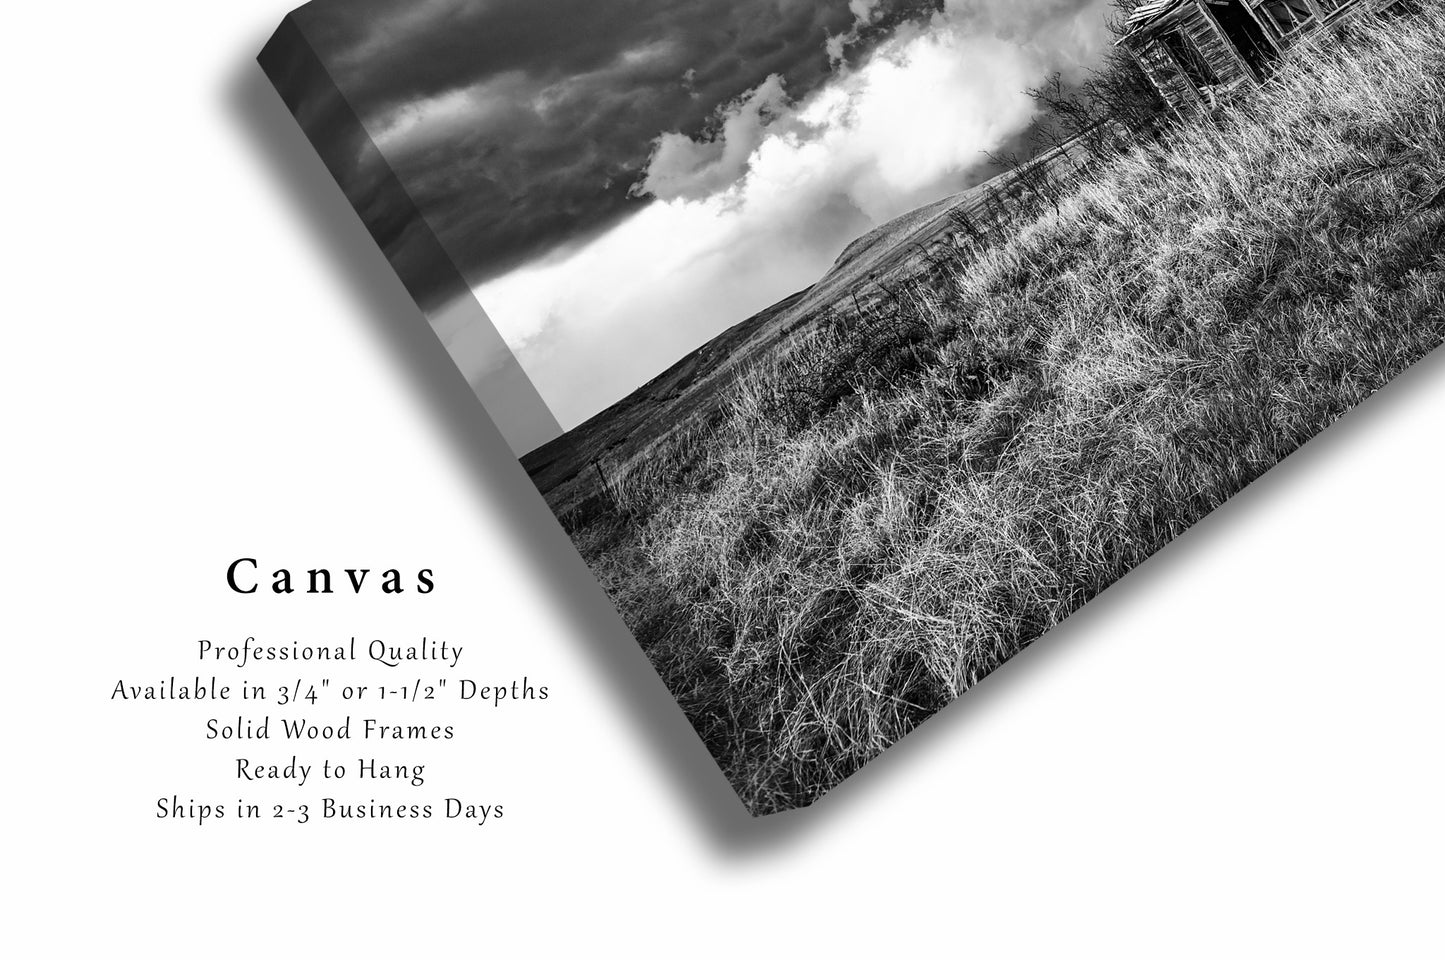 Country Canvas Wall Art - Black and White Gallery Wrap of Abandoned House on Stormy Day in Kansas - Prairie Photography Artwork Photo Decor